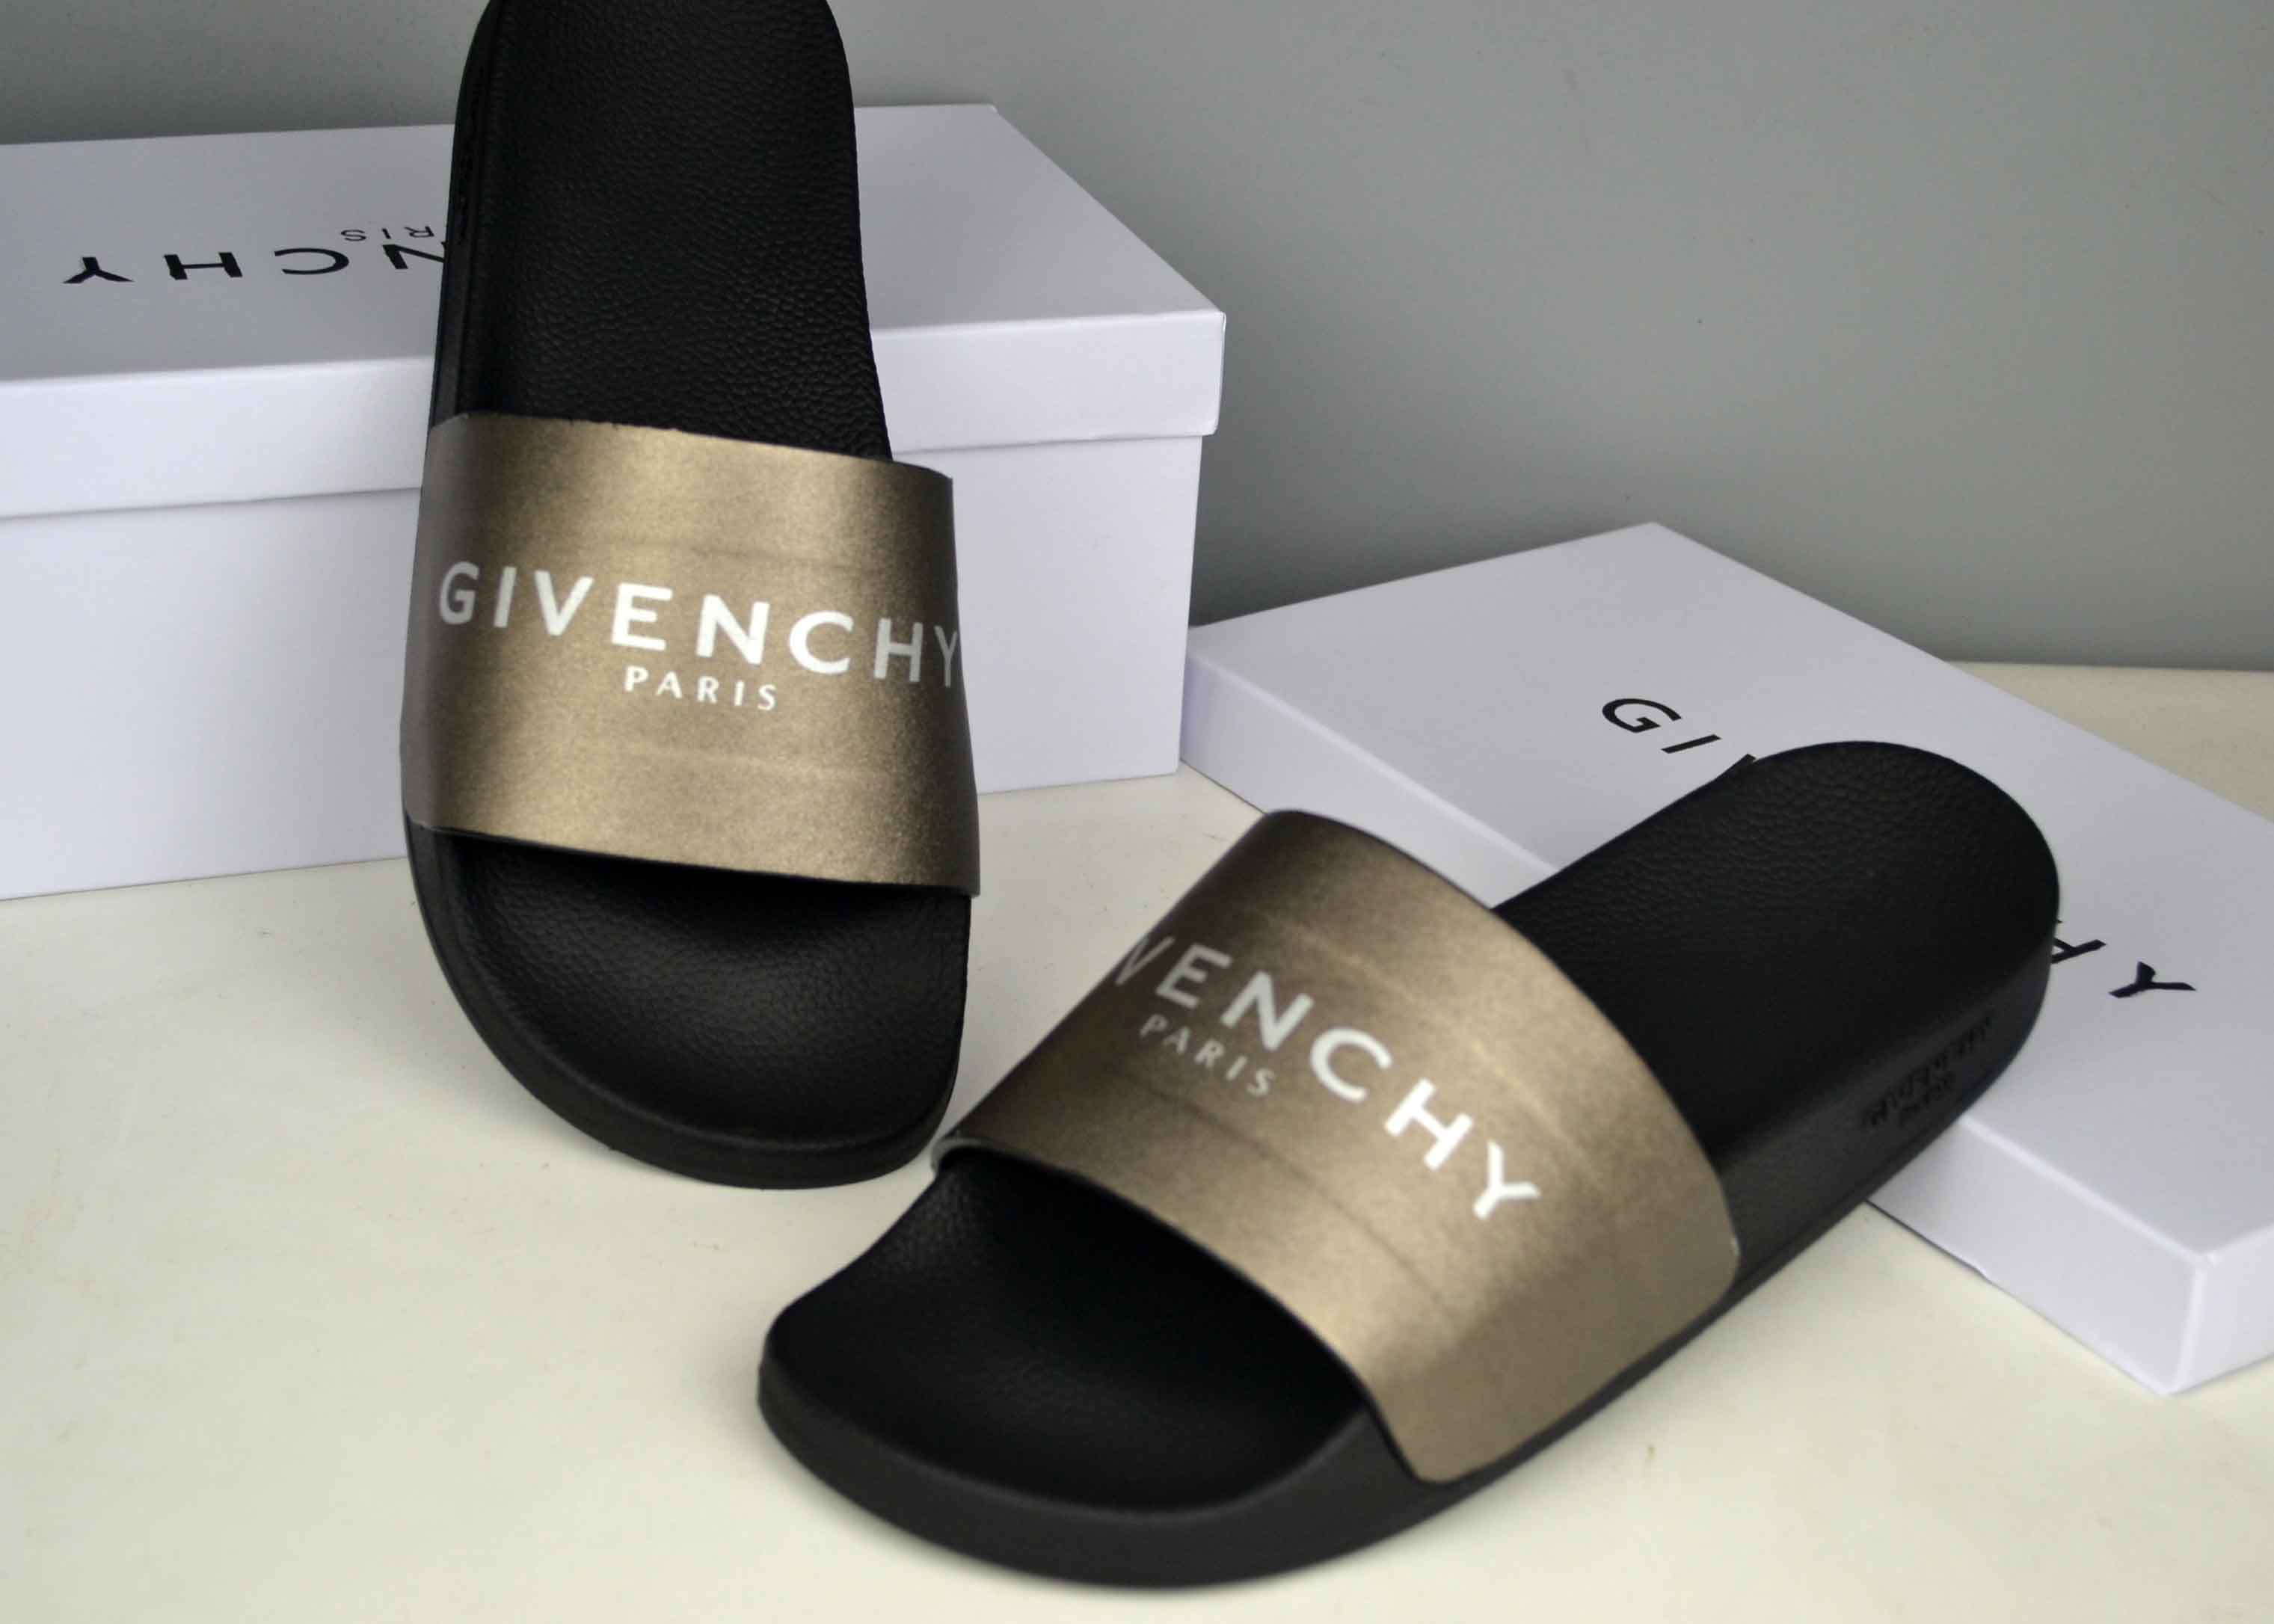 givenchy slippers men's